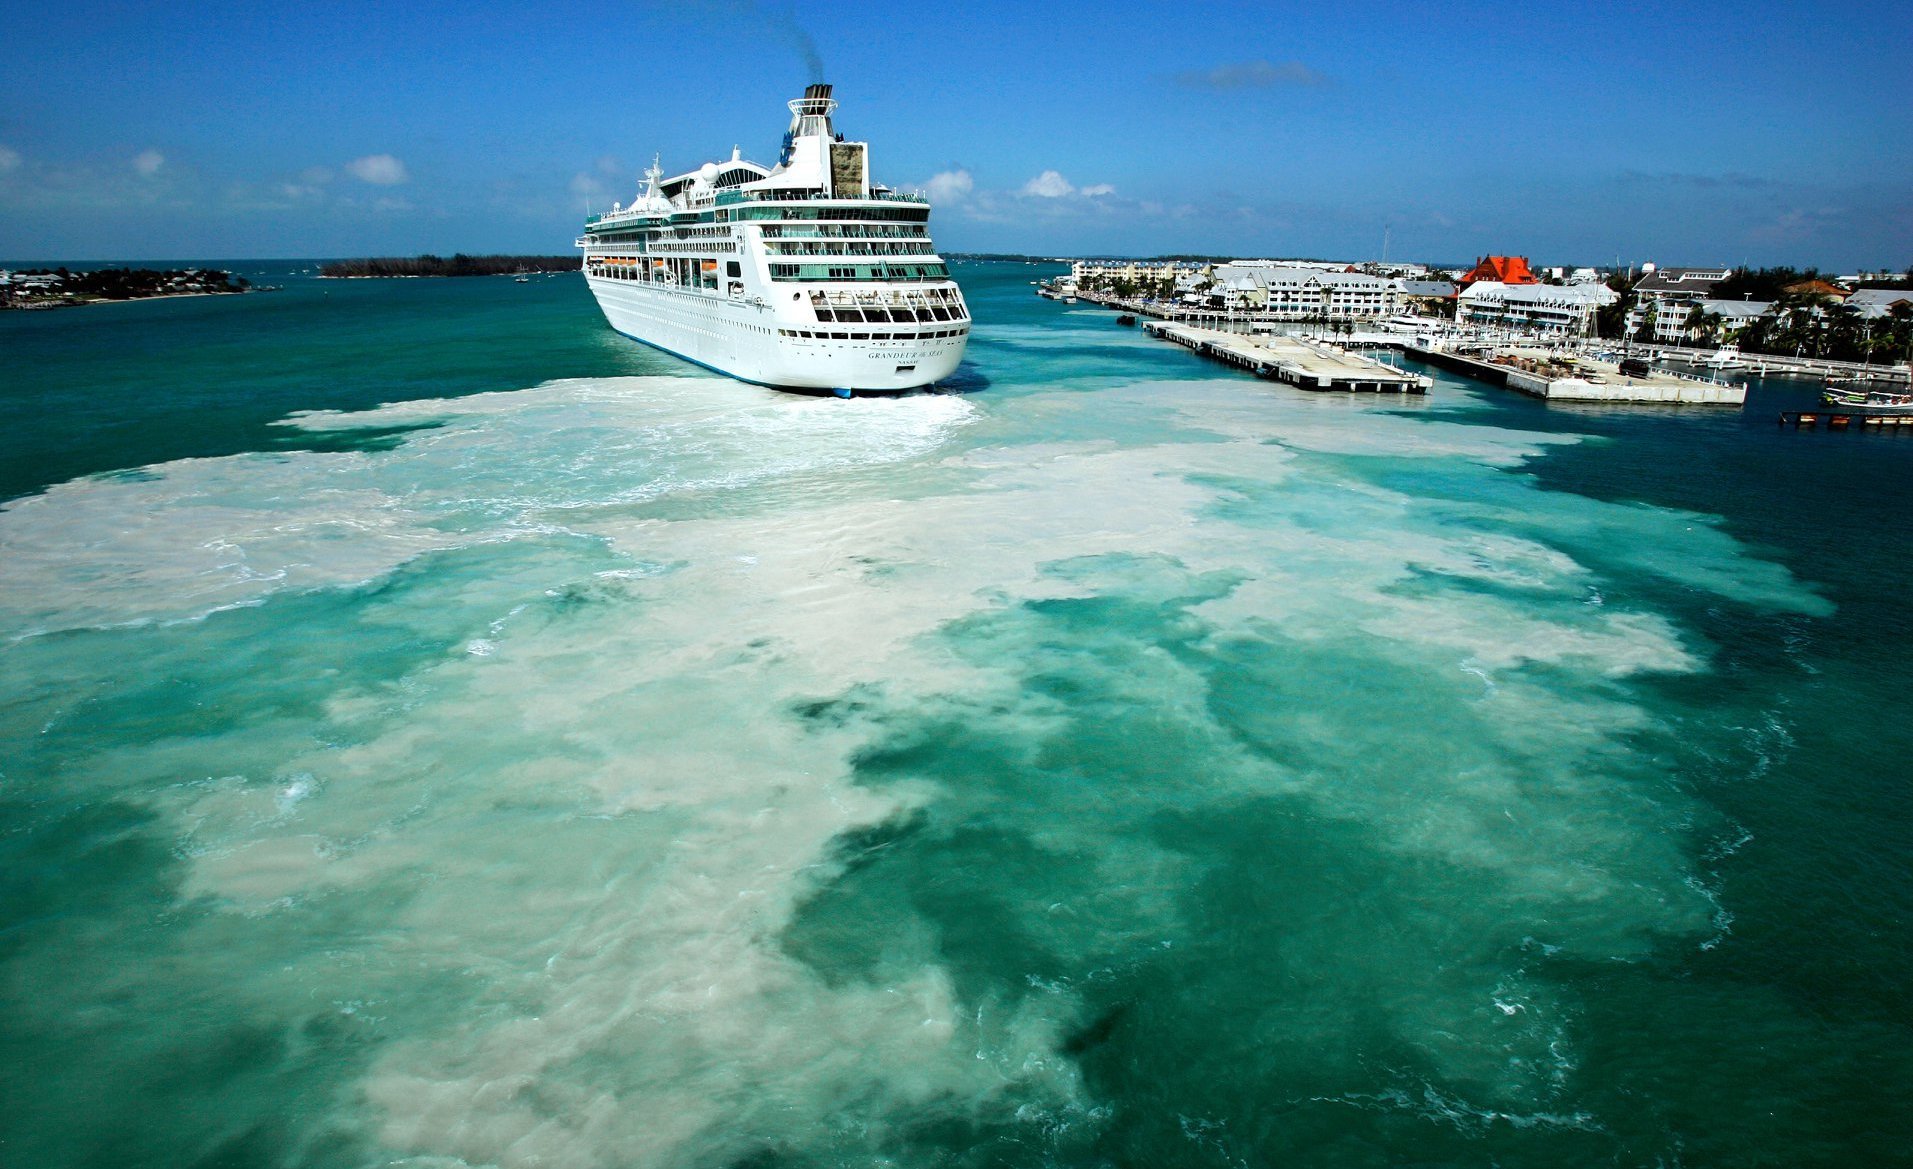 Protect Coral Reefs in the City of Key West by Limiting Cruise Ships in Key West